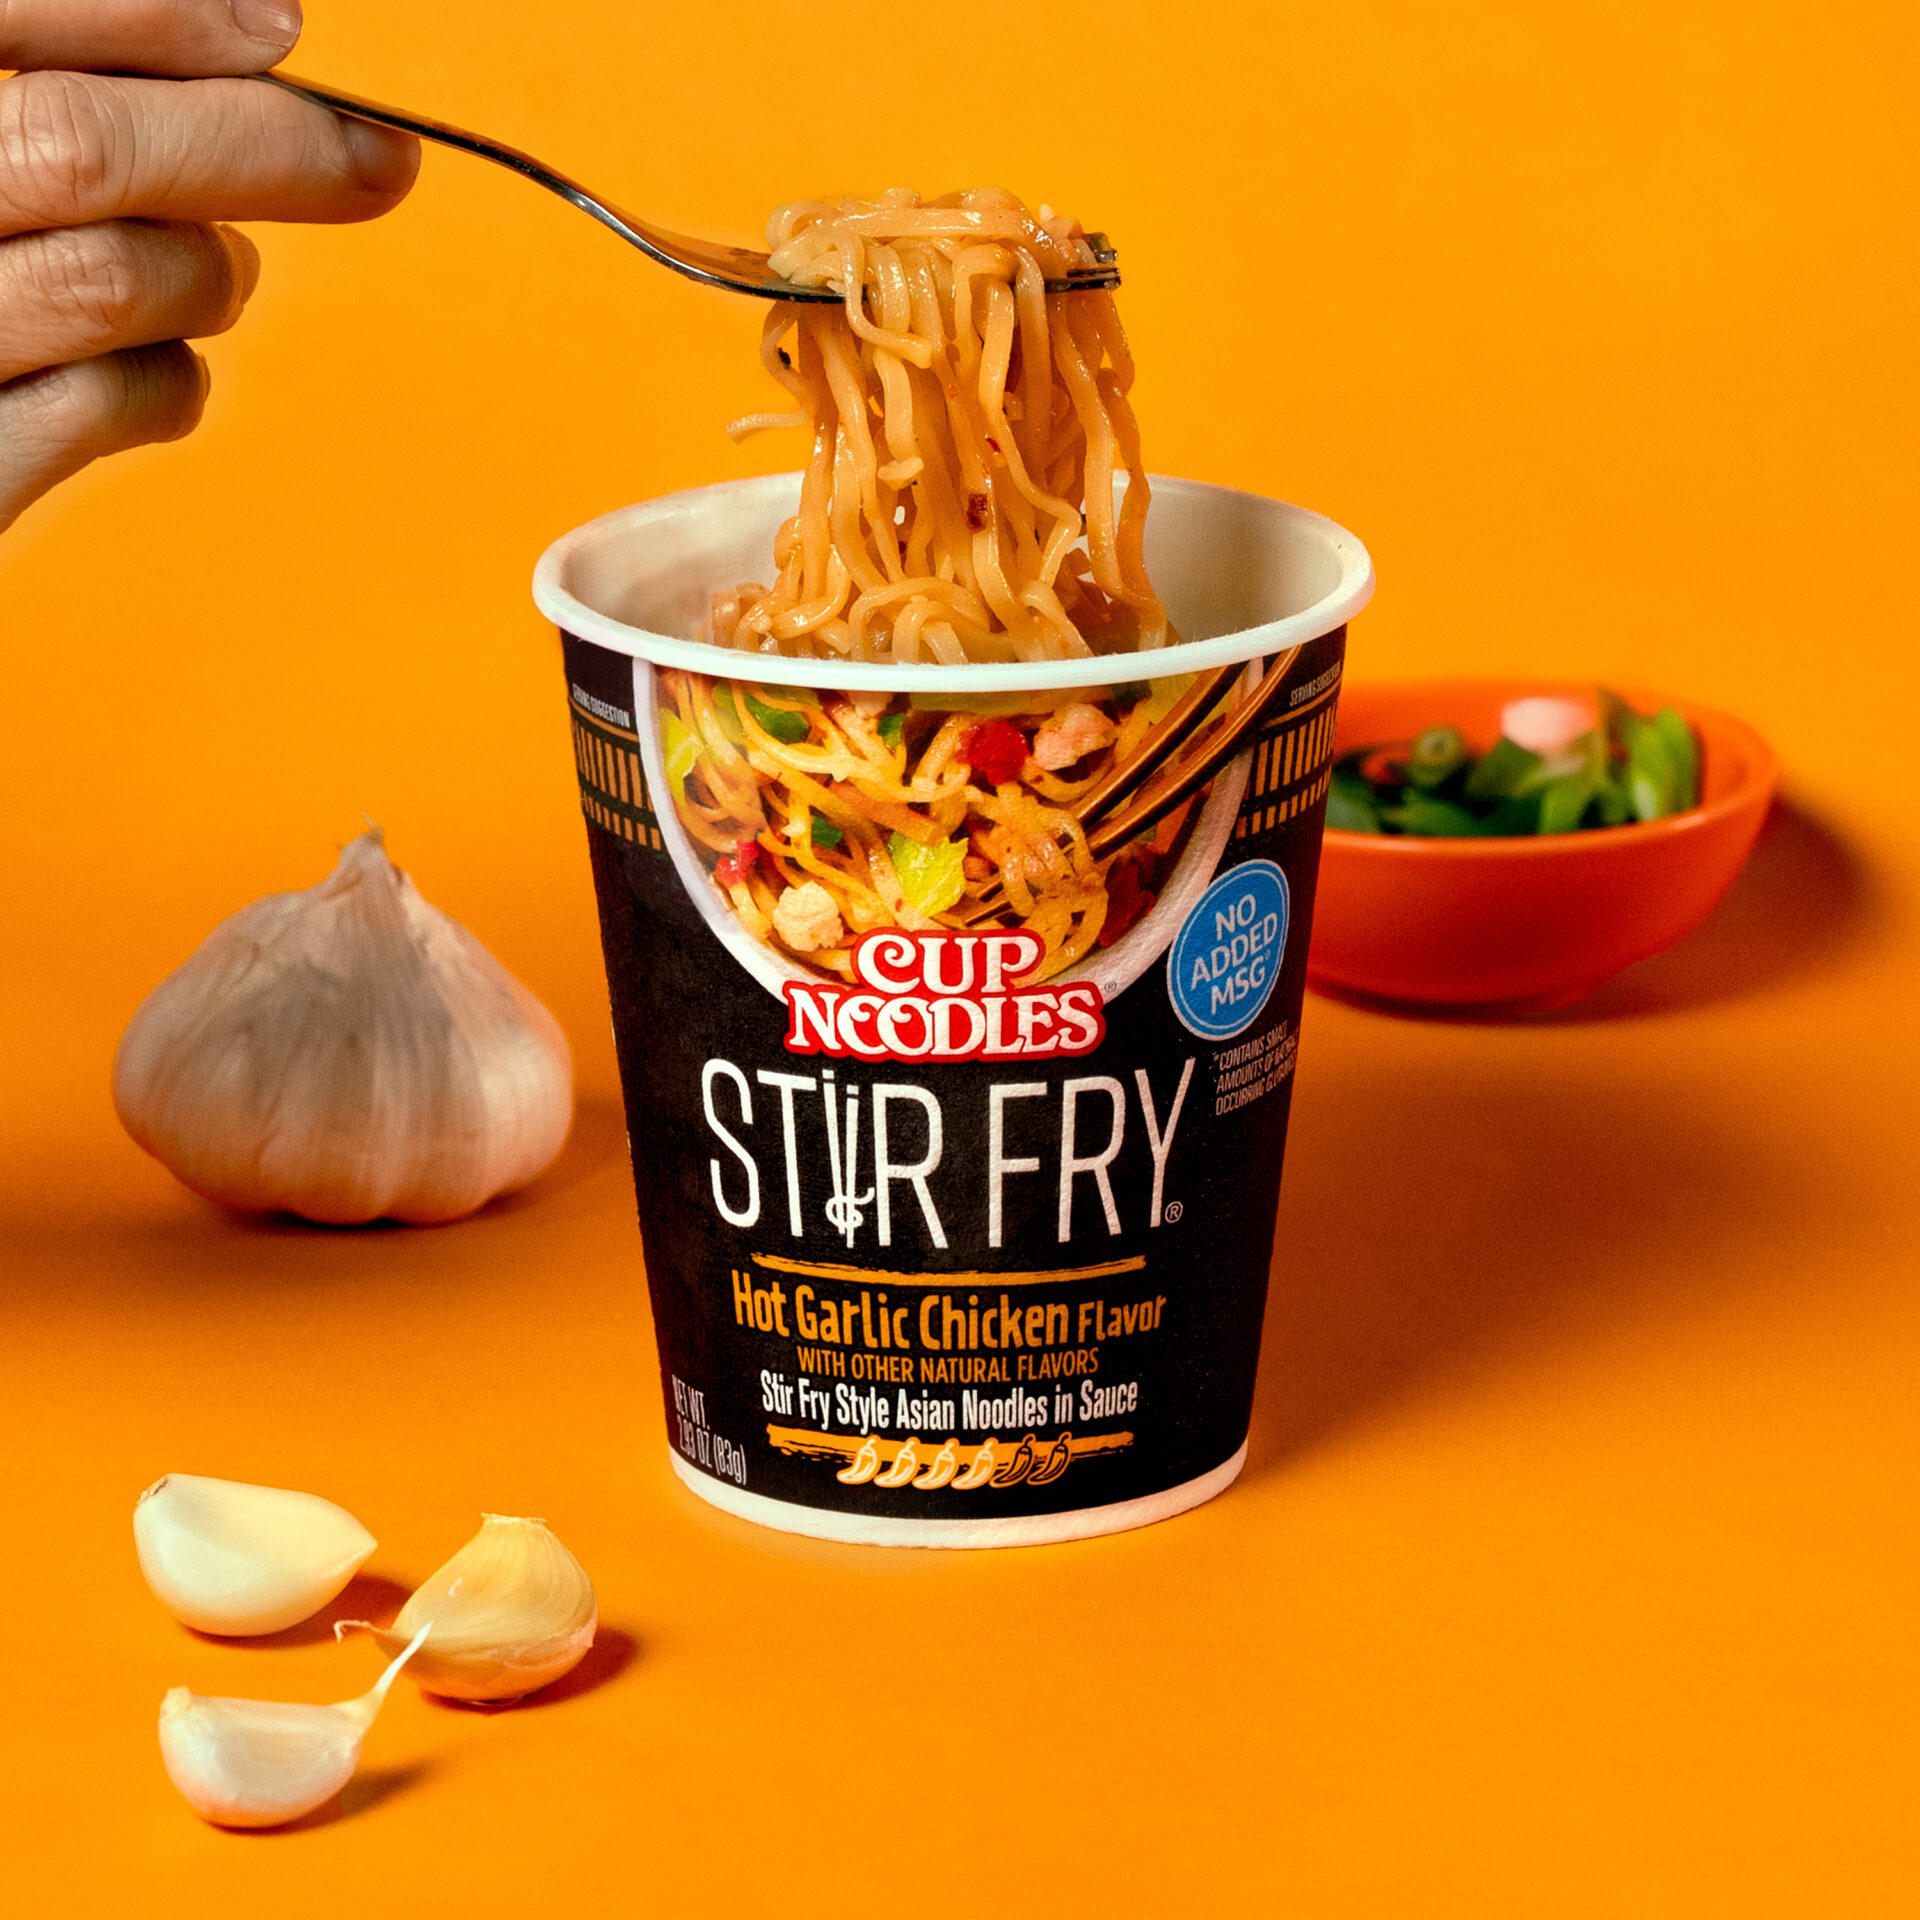 23 NISSIN Content Product CN SF HotGarlicChicken SM X1 0111 Retouched R2V1 3000x3000 